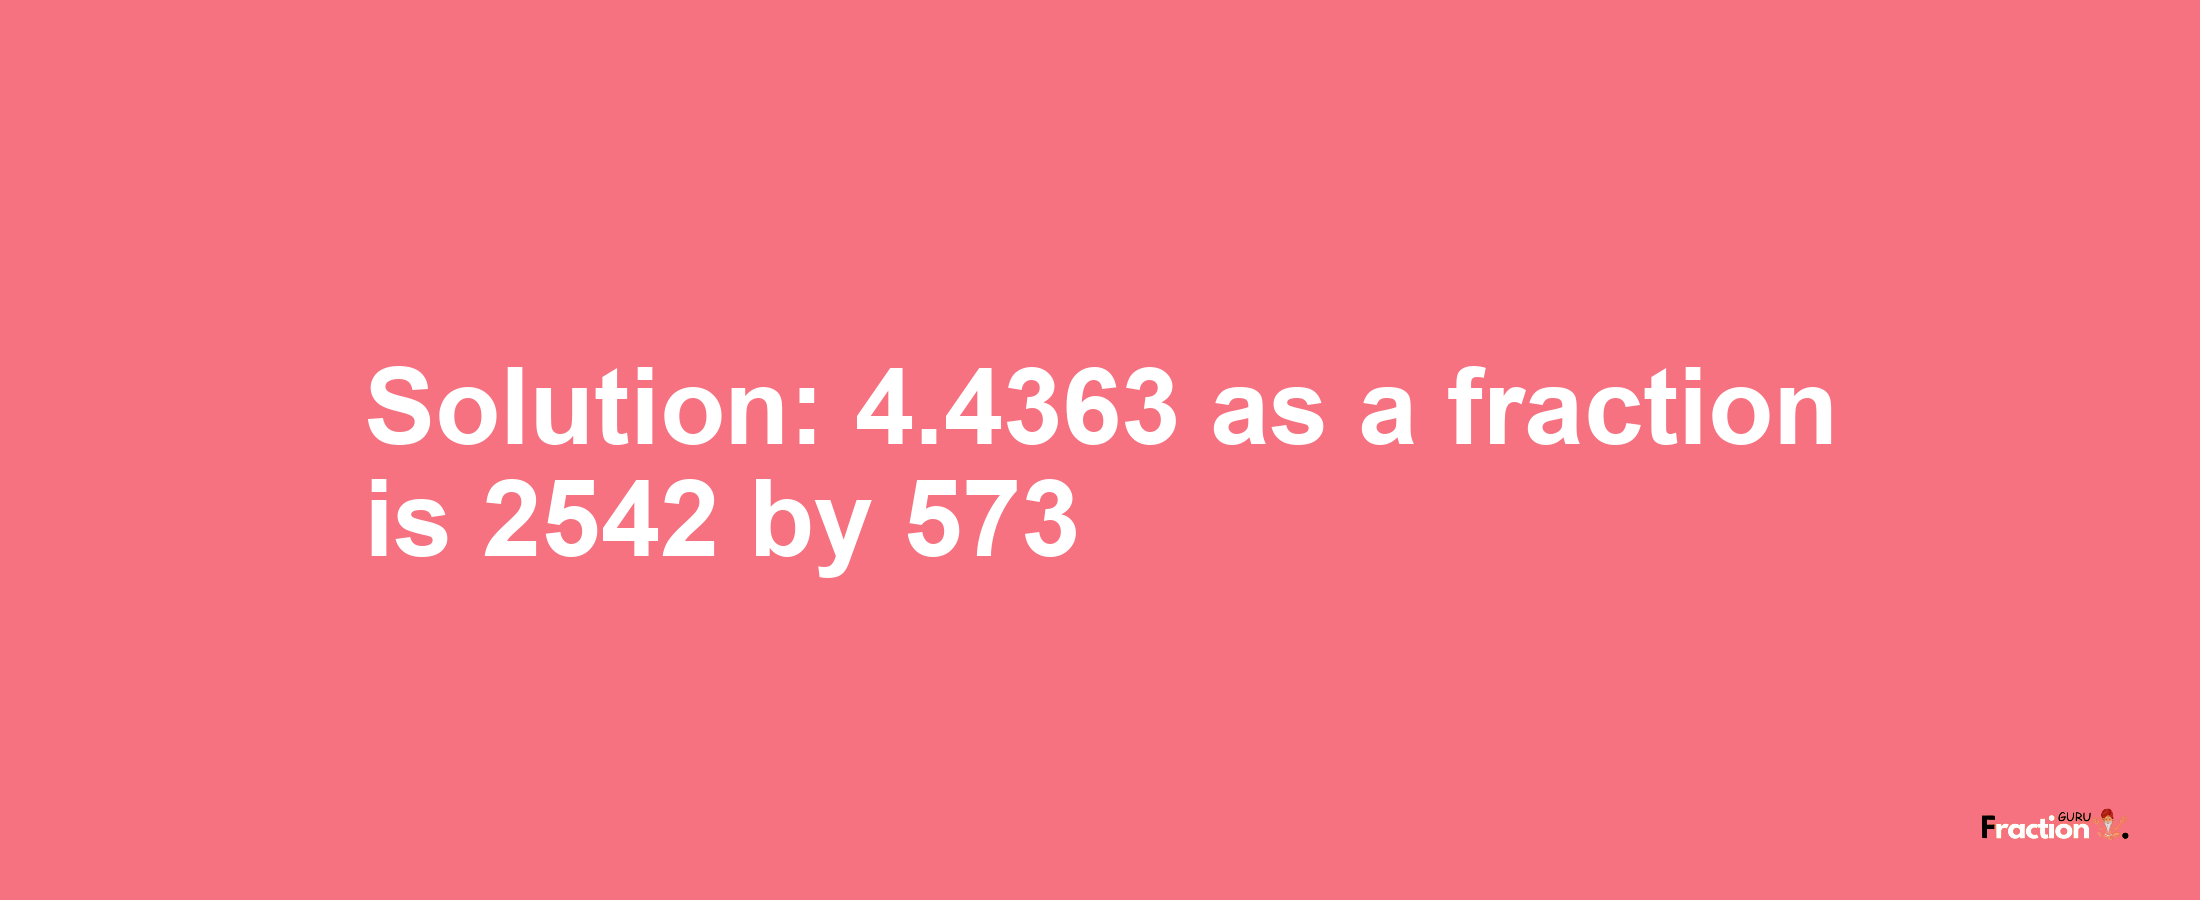 Solution:4.4363 as a fraction is 2542/573